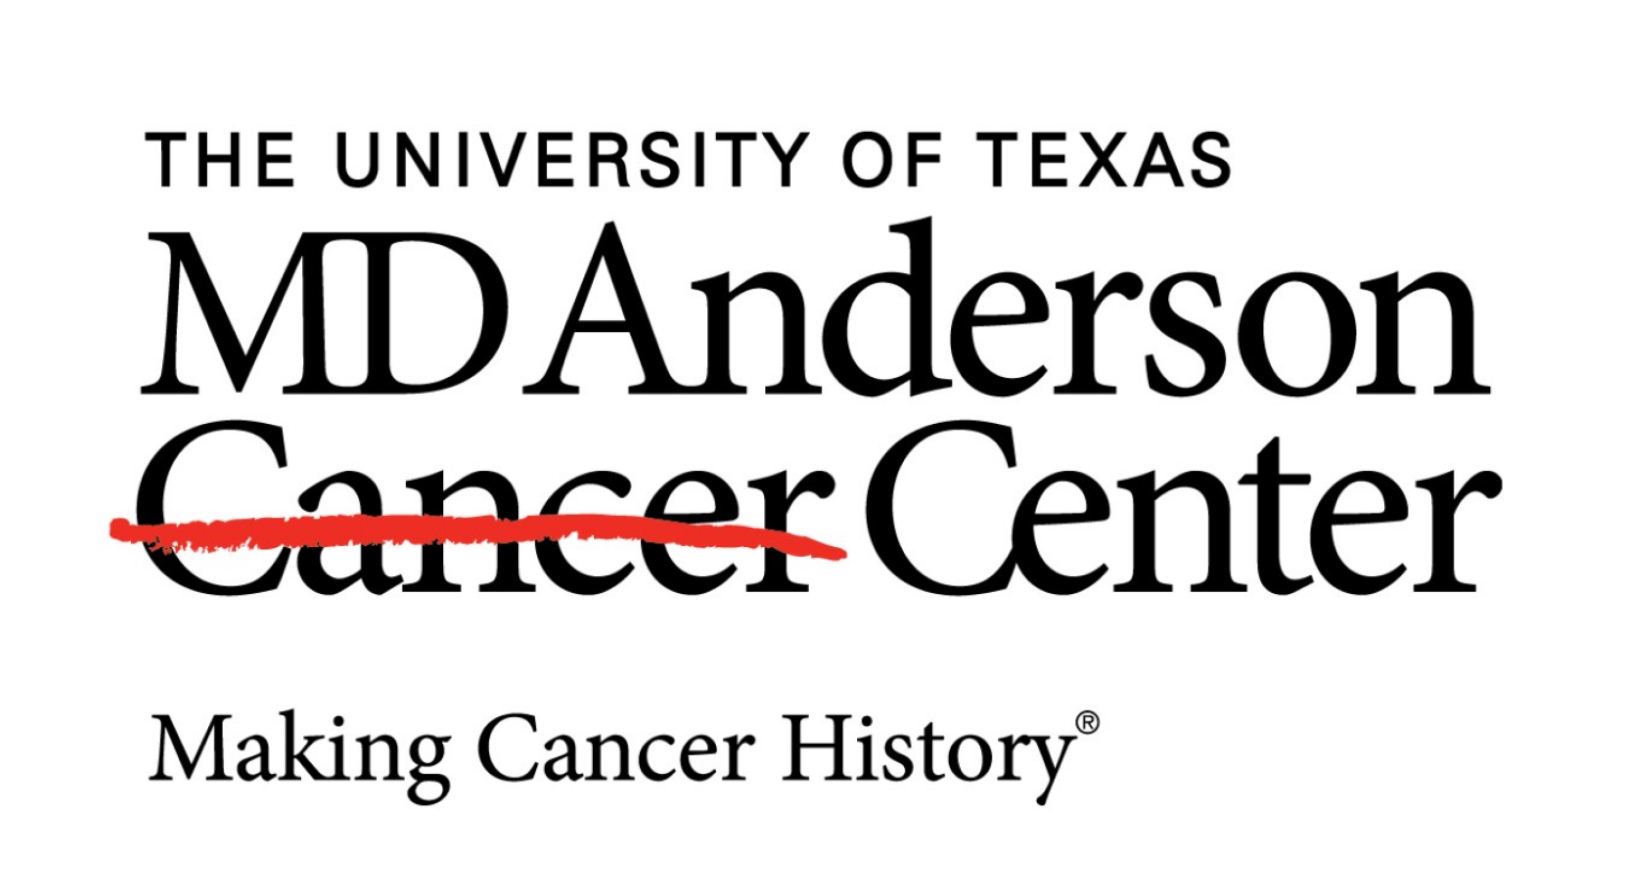 Image Credit: © The University of Texas M. D. Anderson Cancer Center